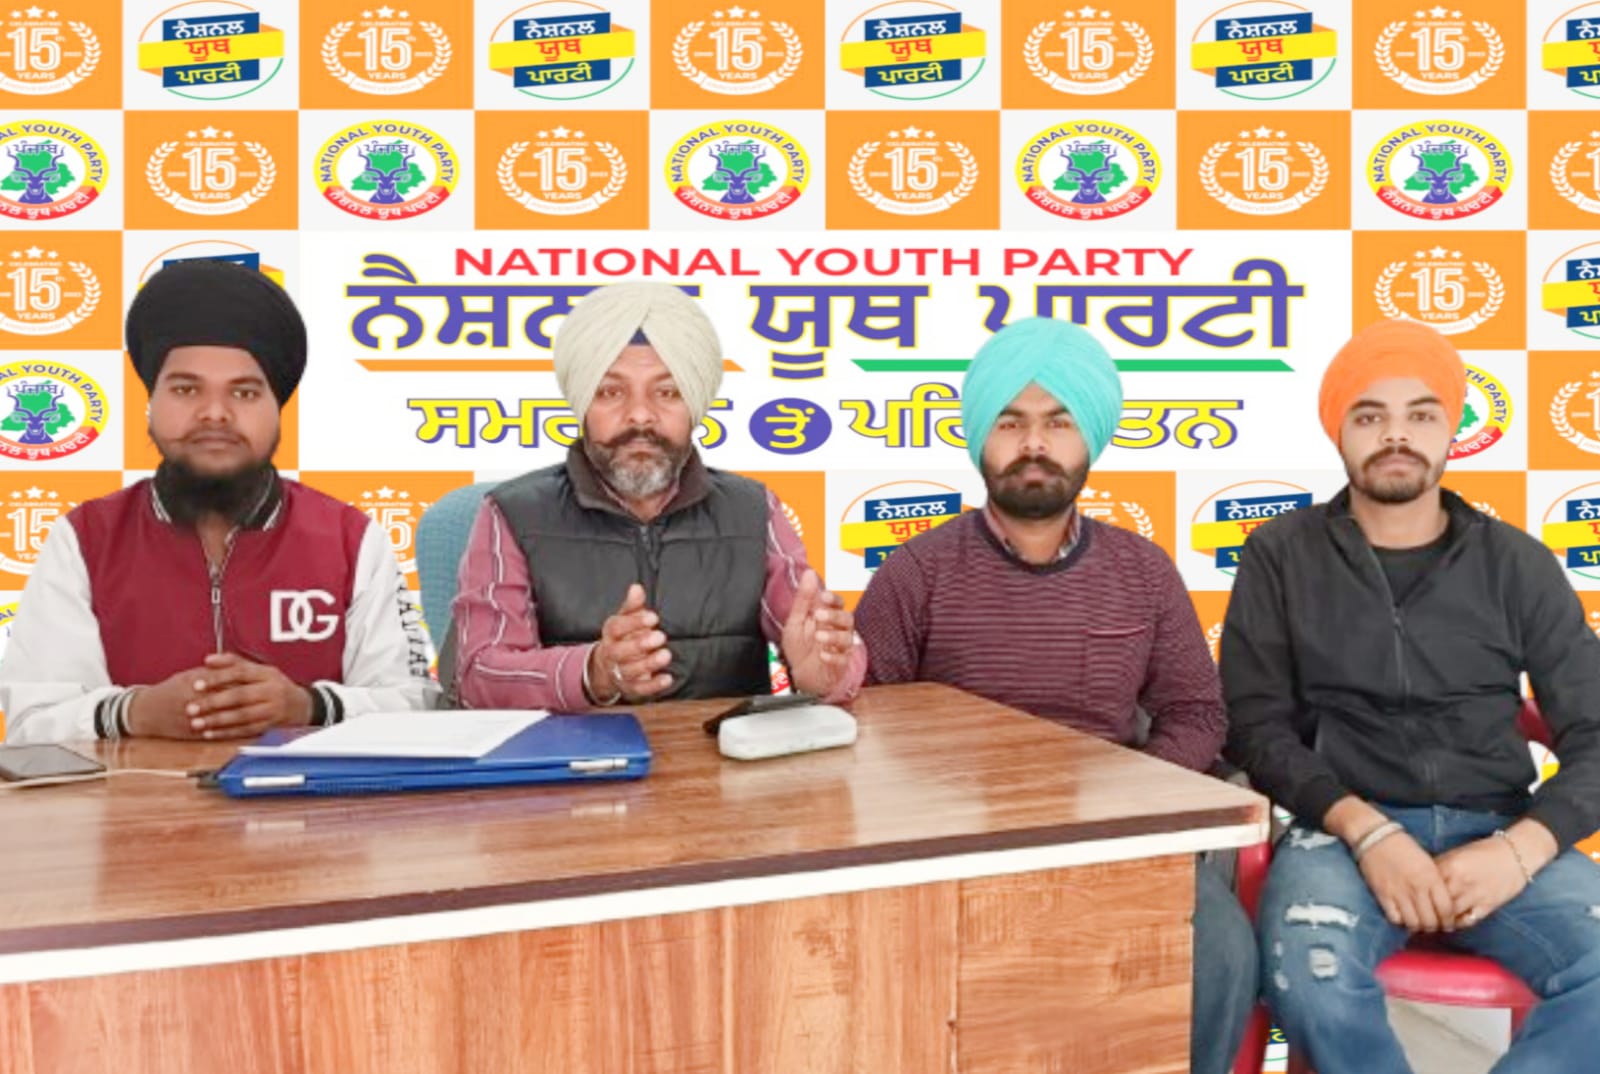 National Youth Party announced candidates